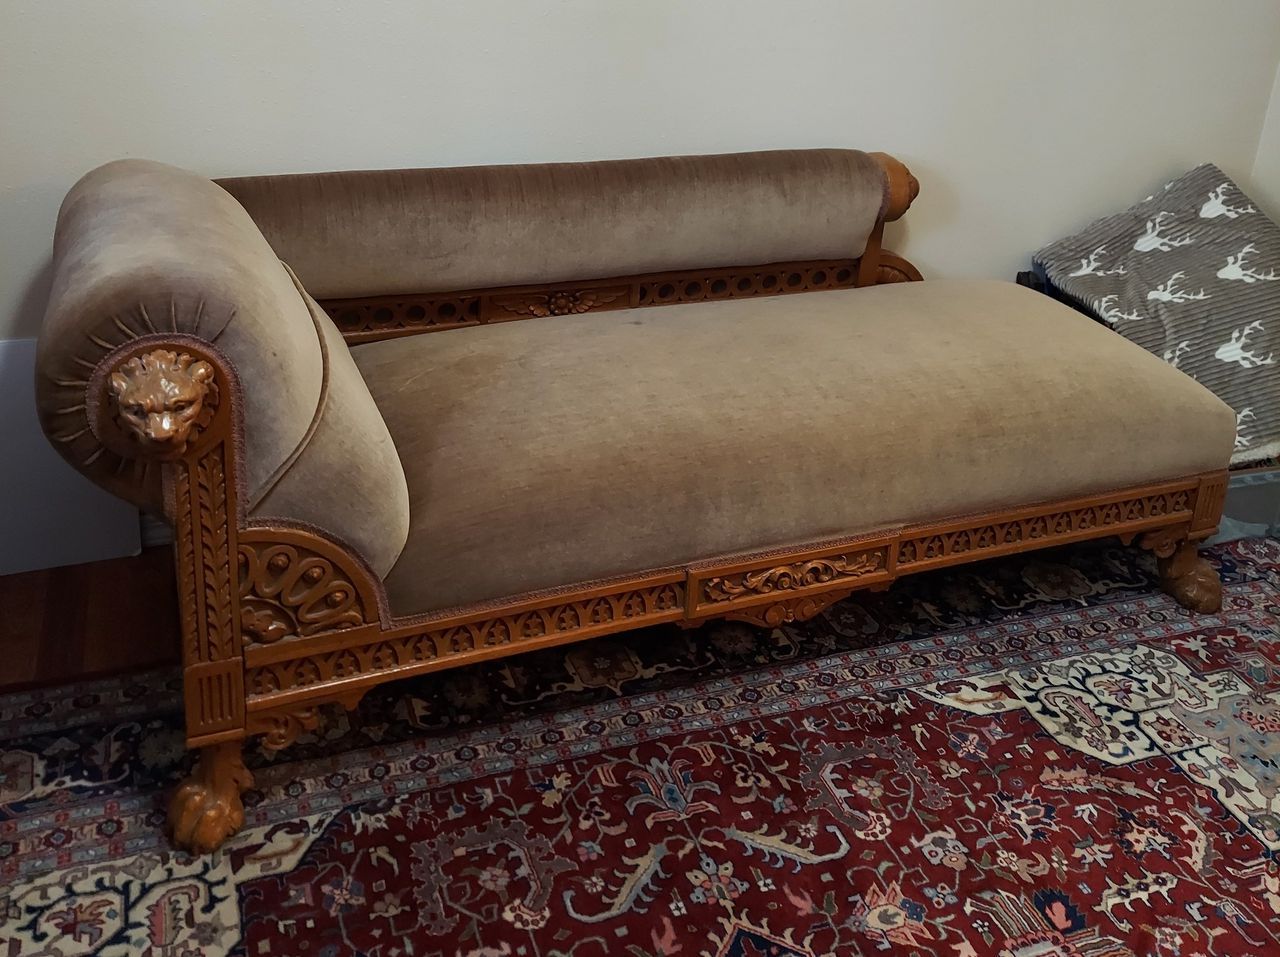 Exploring the Elegance: Unveiling the Secrets of the 19th Century Fainting Couch